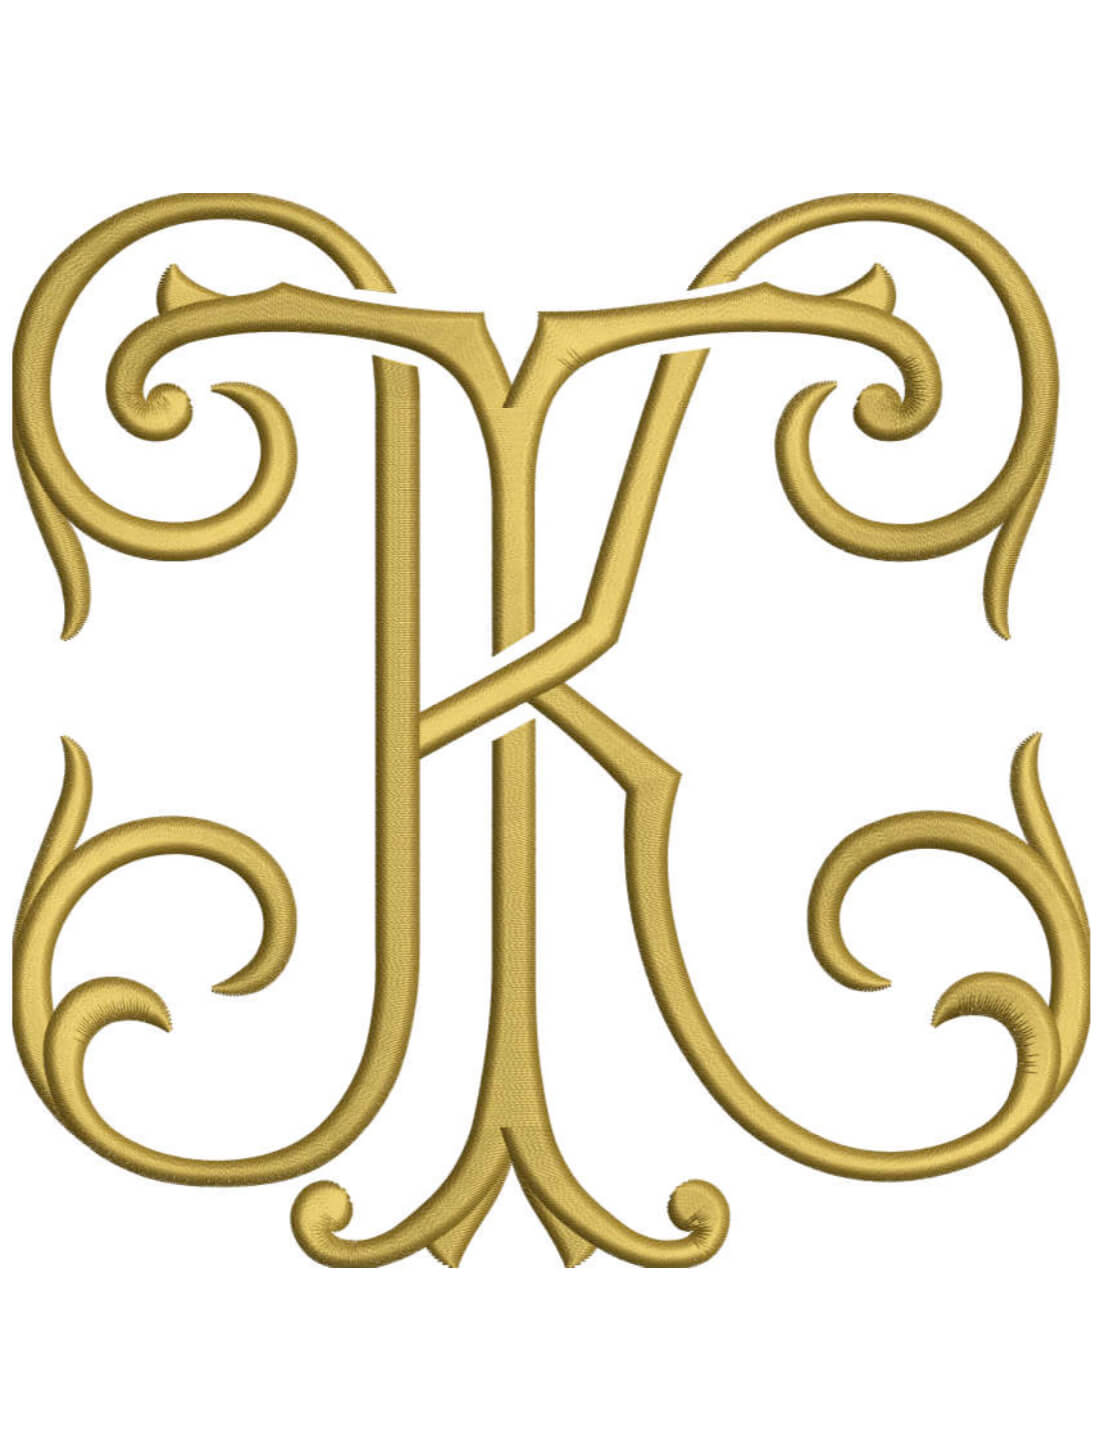 Monogram Couture KT for Embroidery